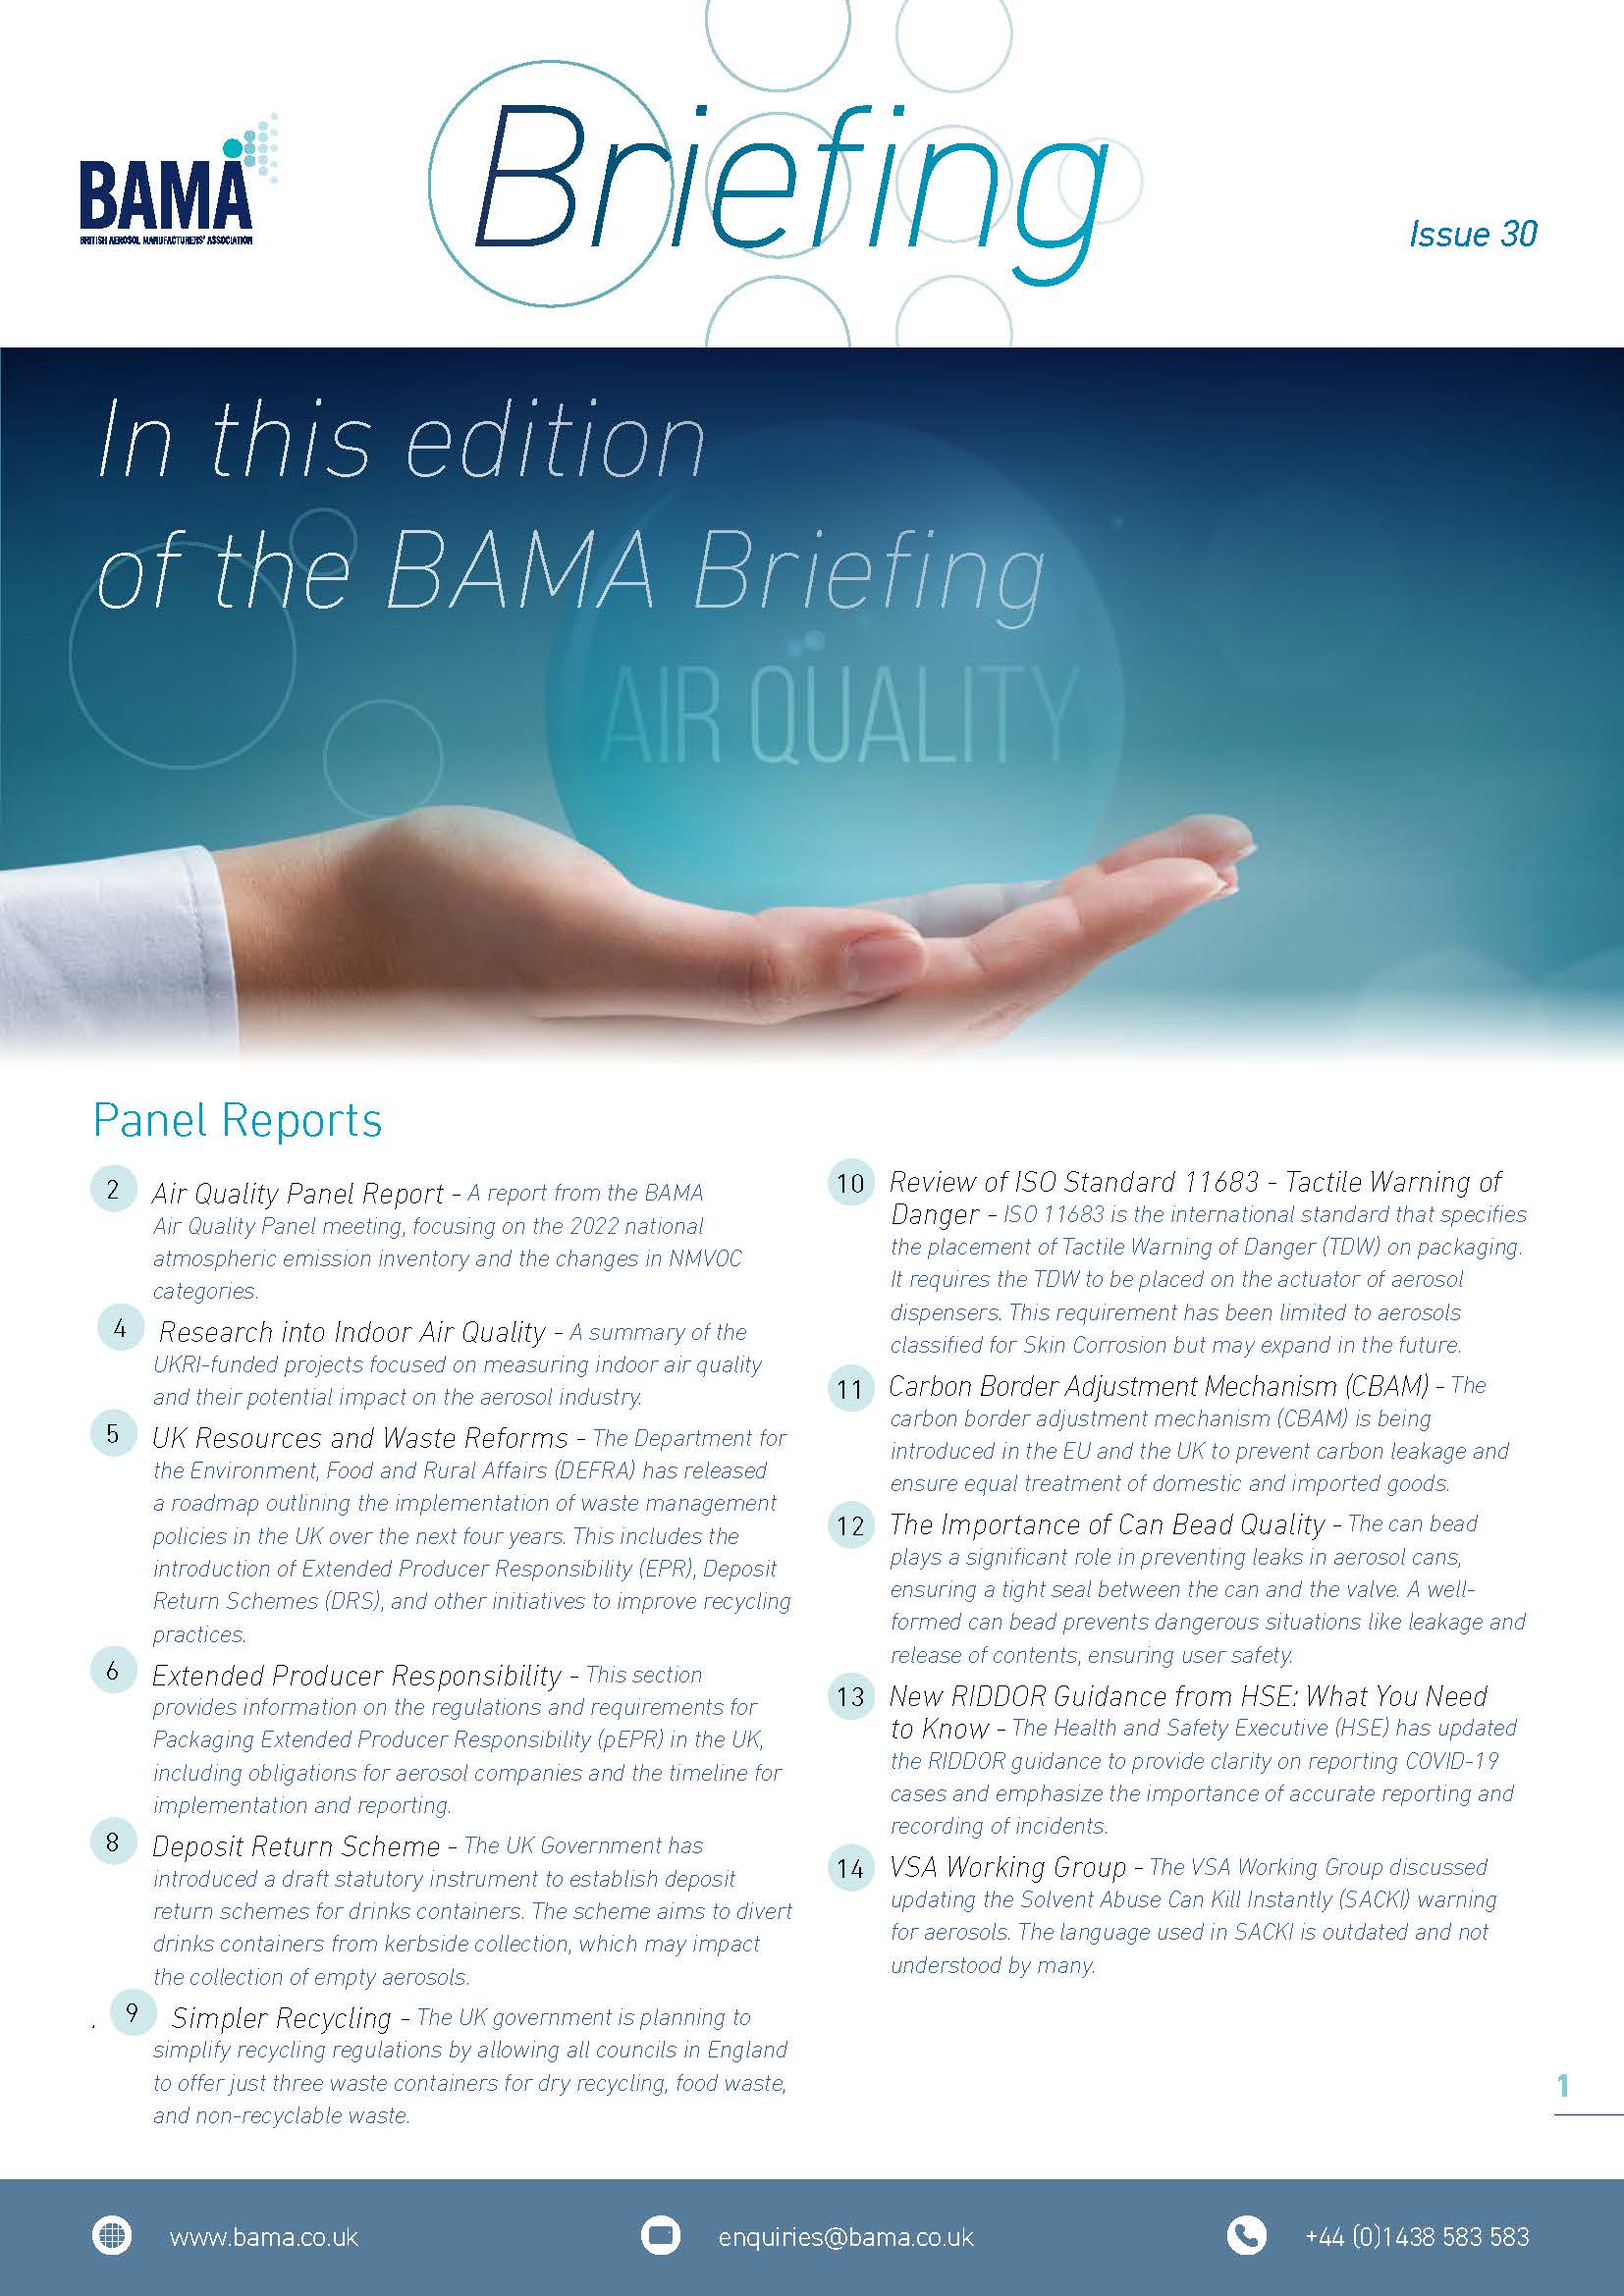 BAMA Briefing Issue 30